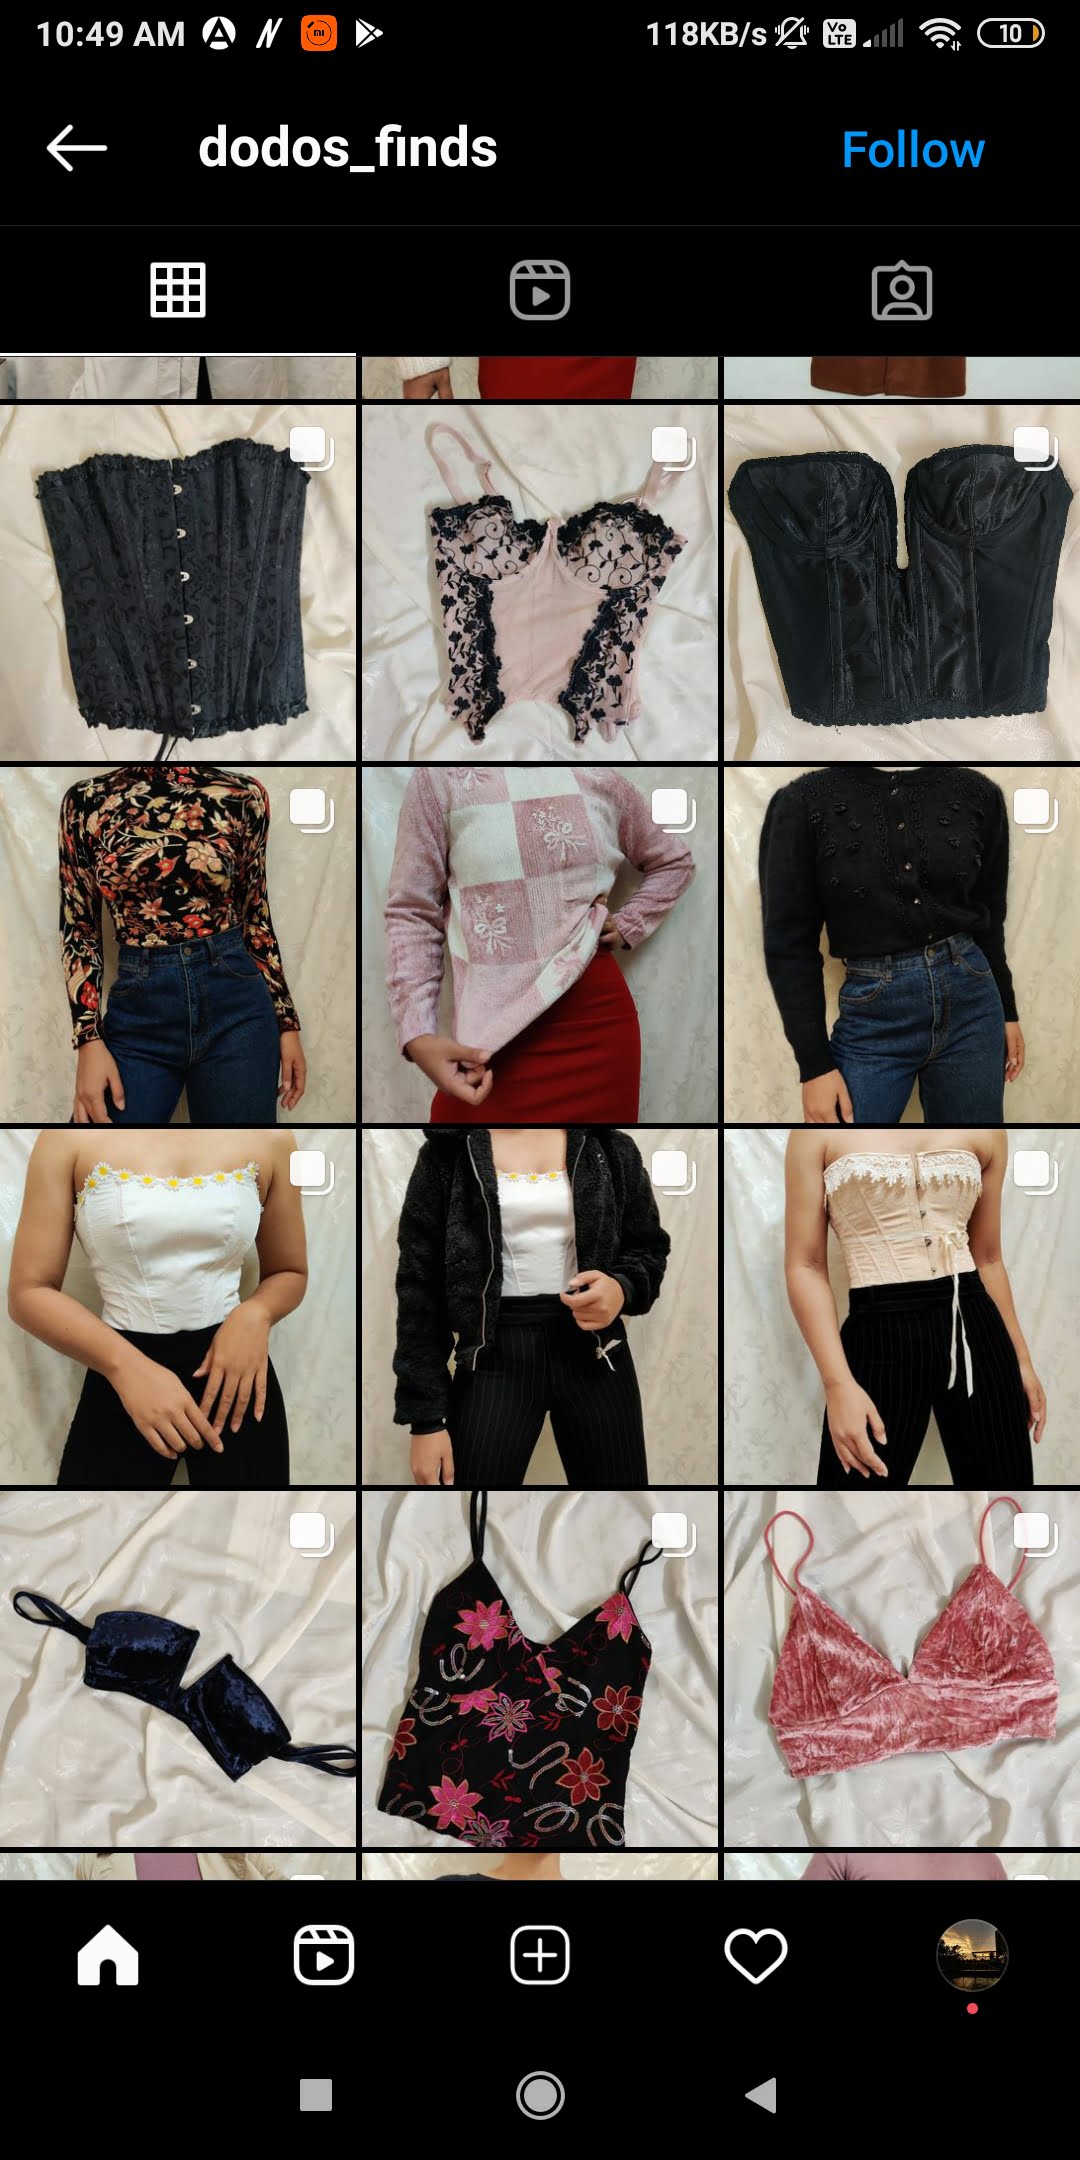 @dodos Finds  -  dodos finds - 50+ SHOPPING Instagram ACCOUNTS for Clothes, Shoes, Jewellery 2022